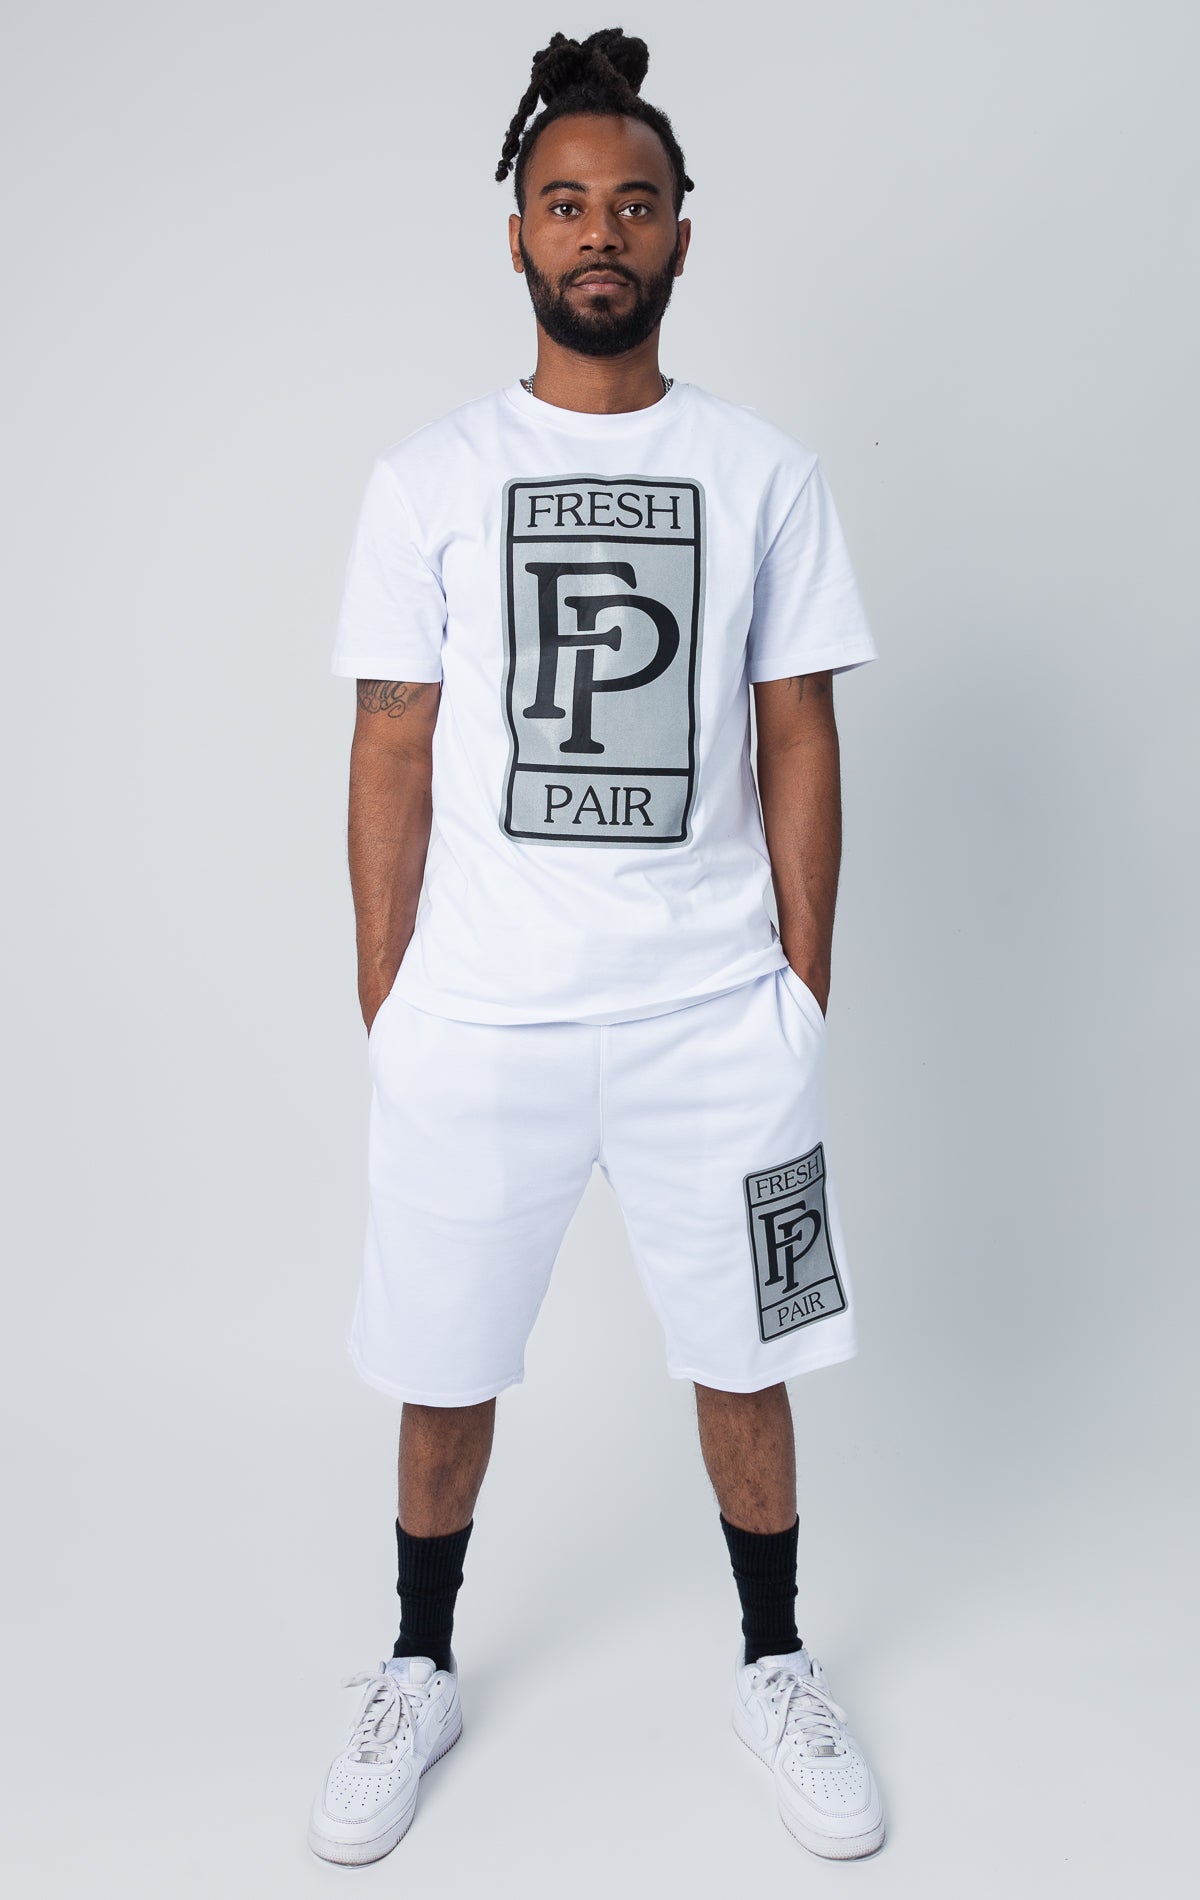 White set of shirt and shorts with "fresh pair" graphic print